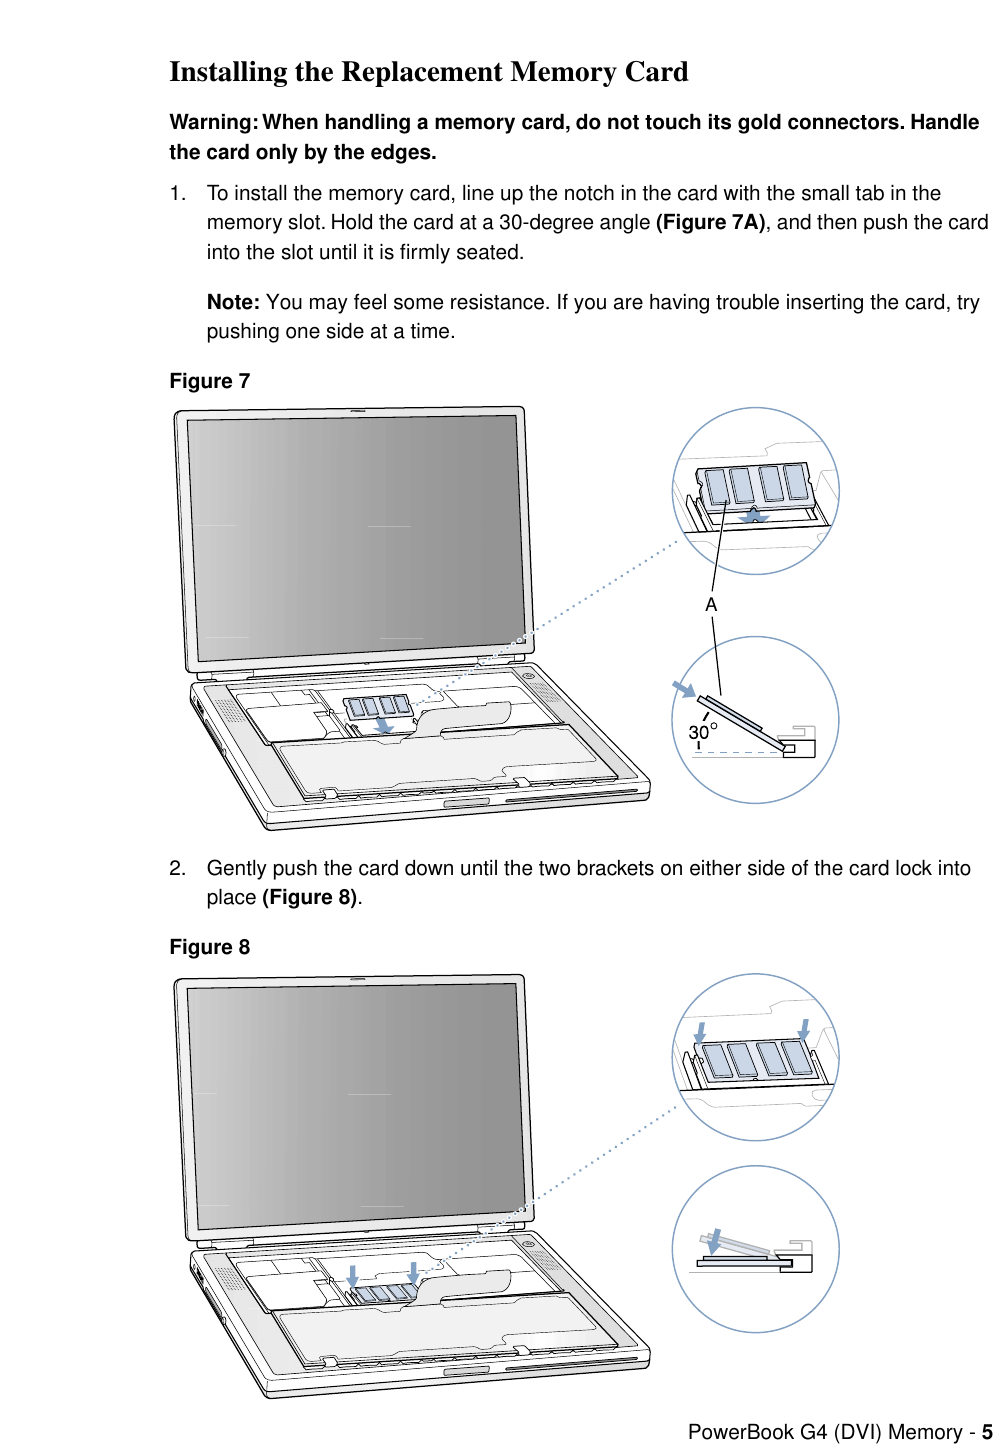 Page 5 of 7 - Apple PowerBook G4 (DVI) User Manual Power Book And (1GHz/867MHz) - Memory Card Replacement Instructions Pbg4dvi-mem-cip